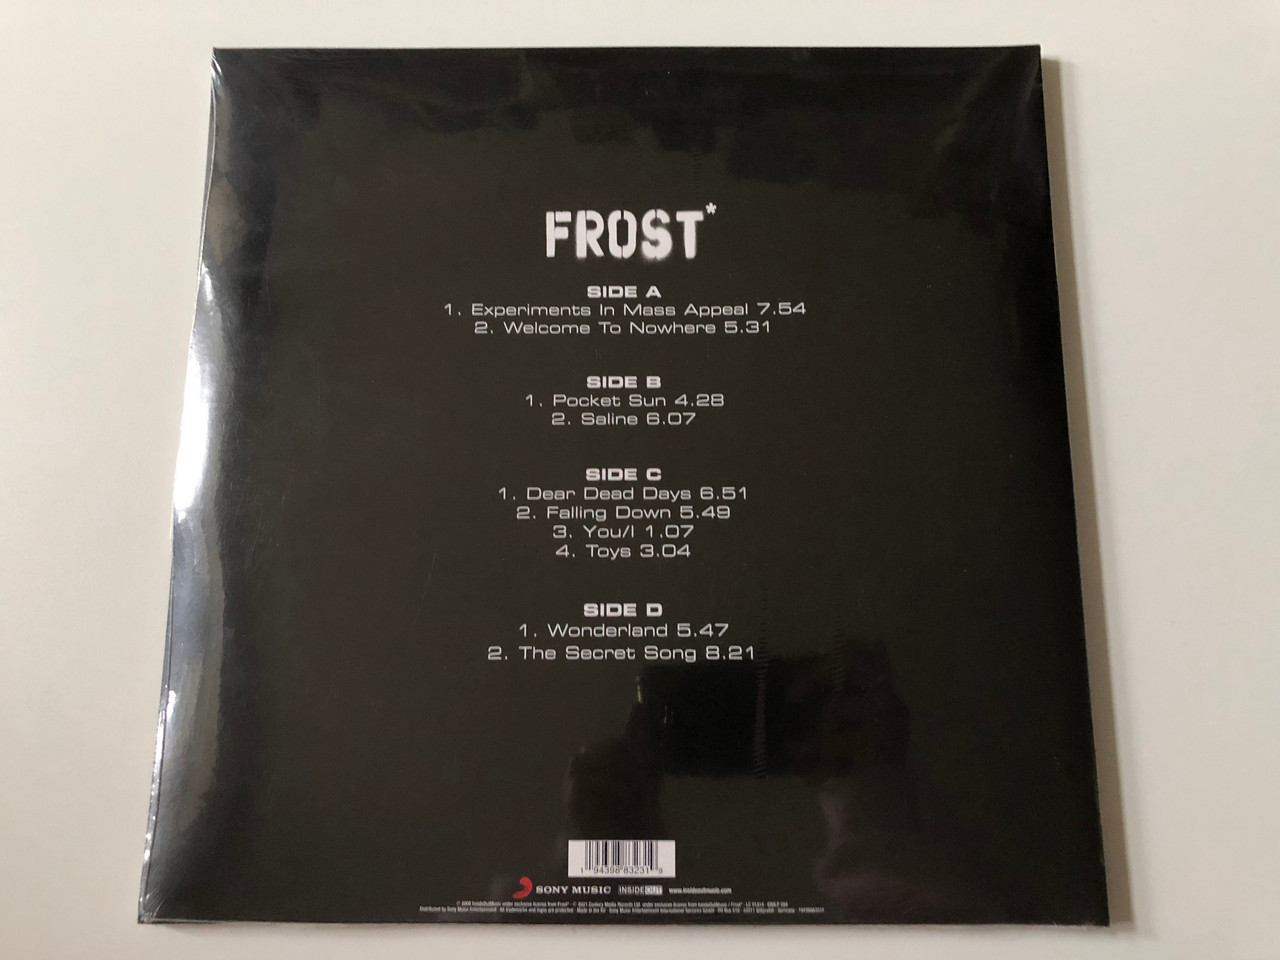 https://cdn10.bigcommerce.com/s-62bdpkt7pb/products/0/images/258030/Frost_Experiments_In_Mass_Appeal_Gatefold_2LP_CD_LP-Booklet_The_much-loved_second_album_from_Frost_originally_released_in_2008_finally_available_on_vinyl_for_the_very_first_time___30335.1667936071.1280.1280.JPG?c=2&_gl=1*zbvihe*_ga*MjA2NTIxMjE2MC4xNTkwNTEyNTMy*_ga_WS2VZYPC6G*MTY2NzkzMzM1OS42MjEuMS4xNjY3OTM1NjYwLjU4LjAuMA..